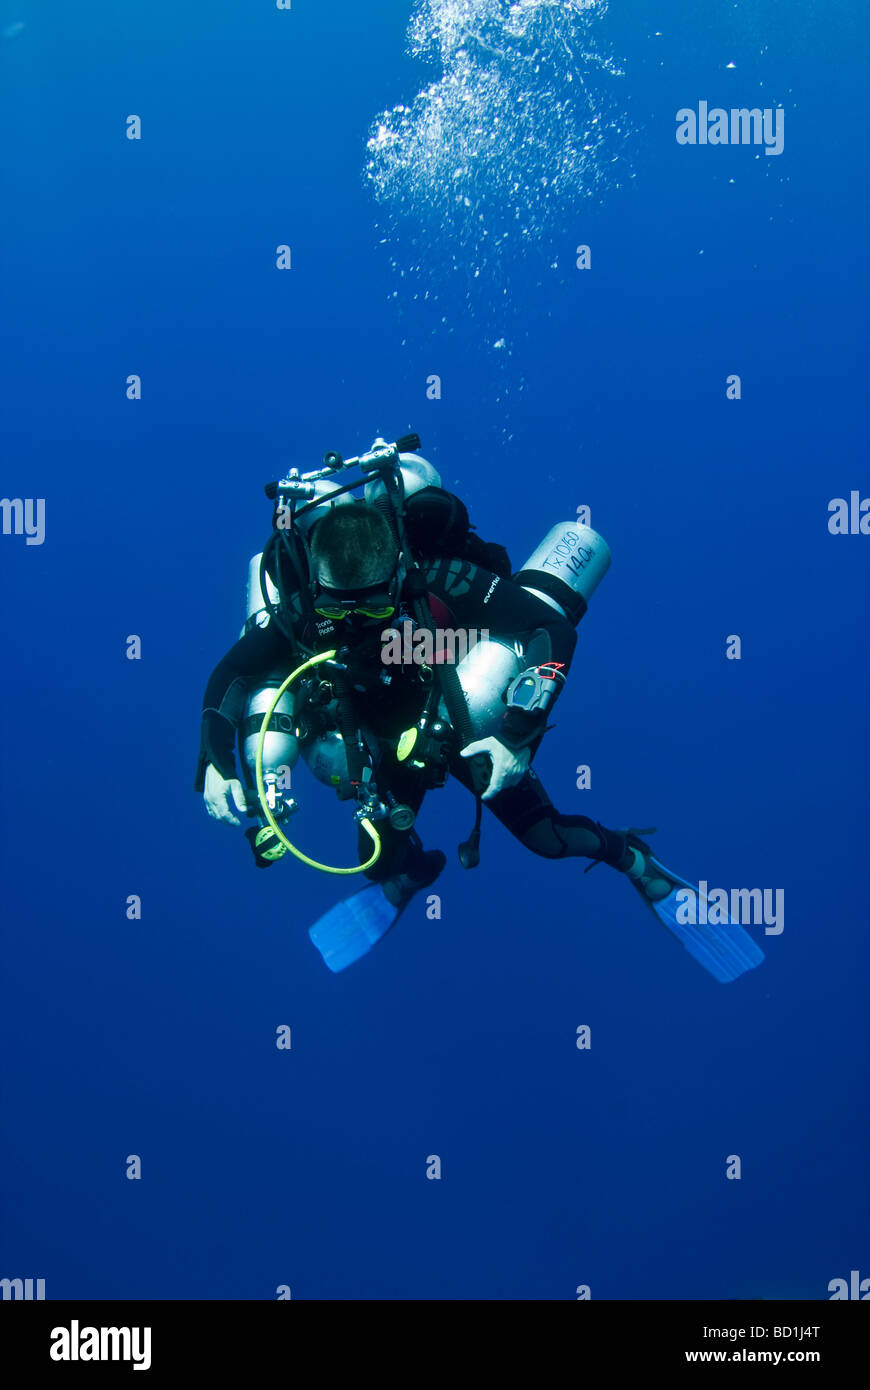 Diver surfacing from the deep. Stock Photo